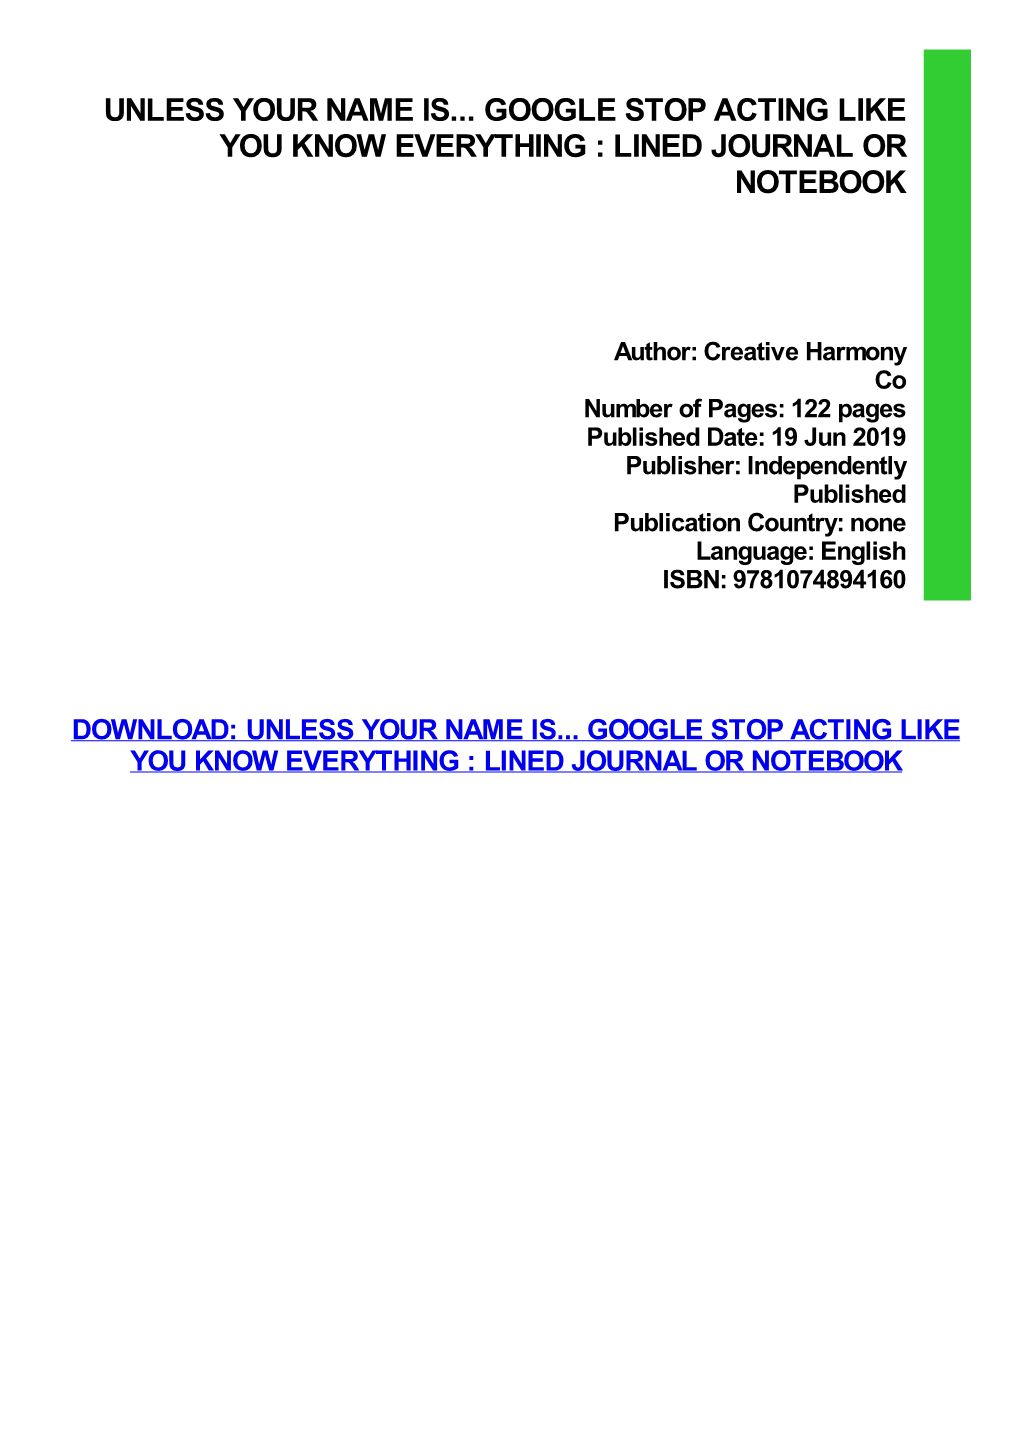 Unless Your Name Is... Google Stop Acting Like You Know Everything : Lined Journal Or Notebook